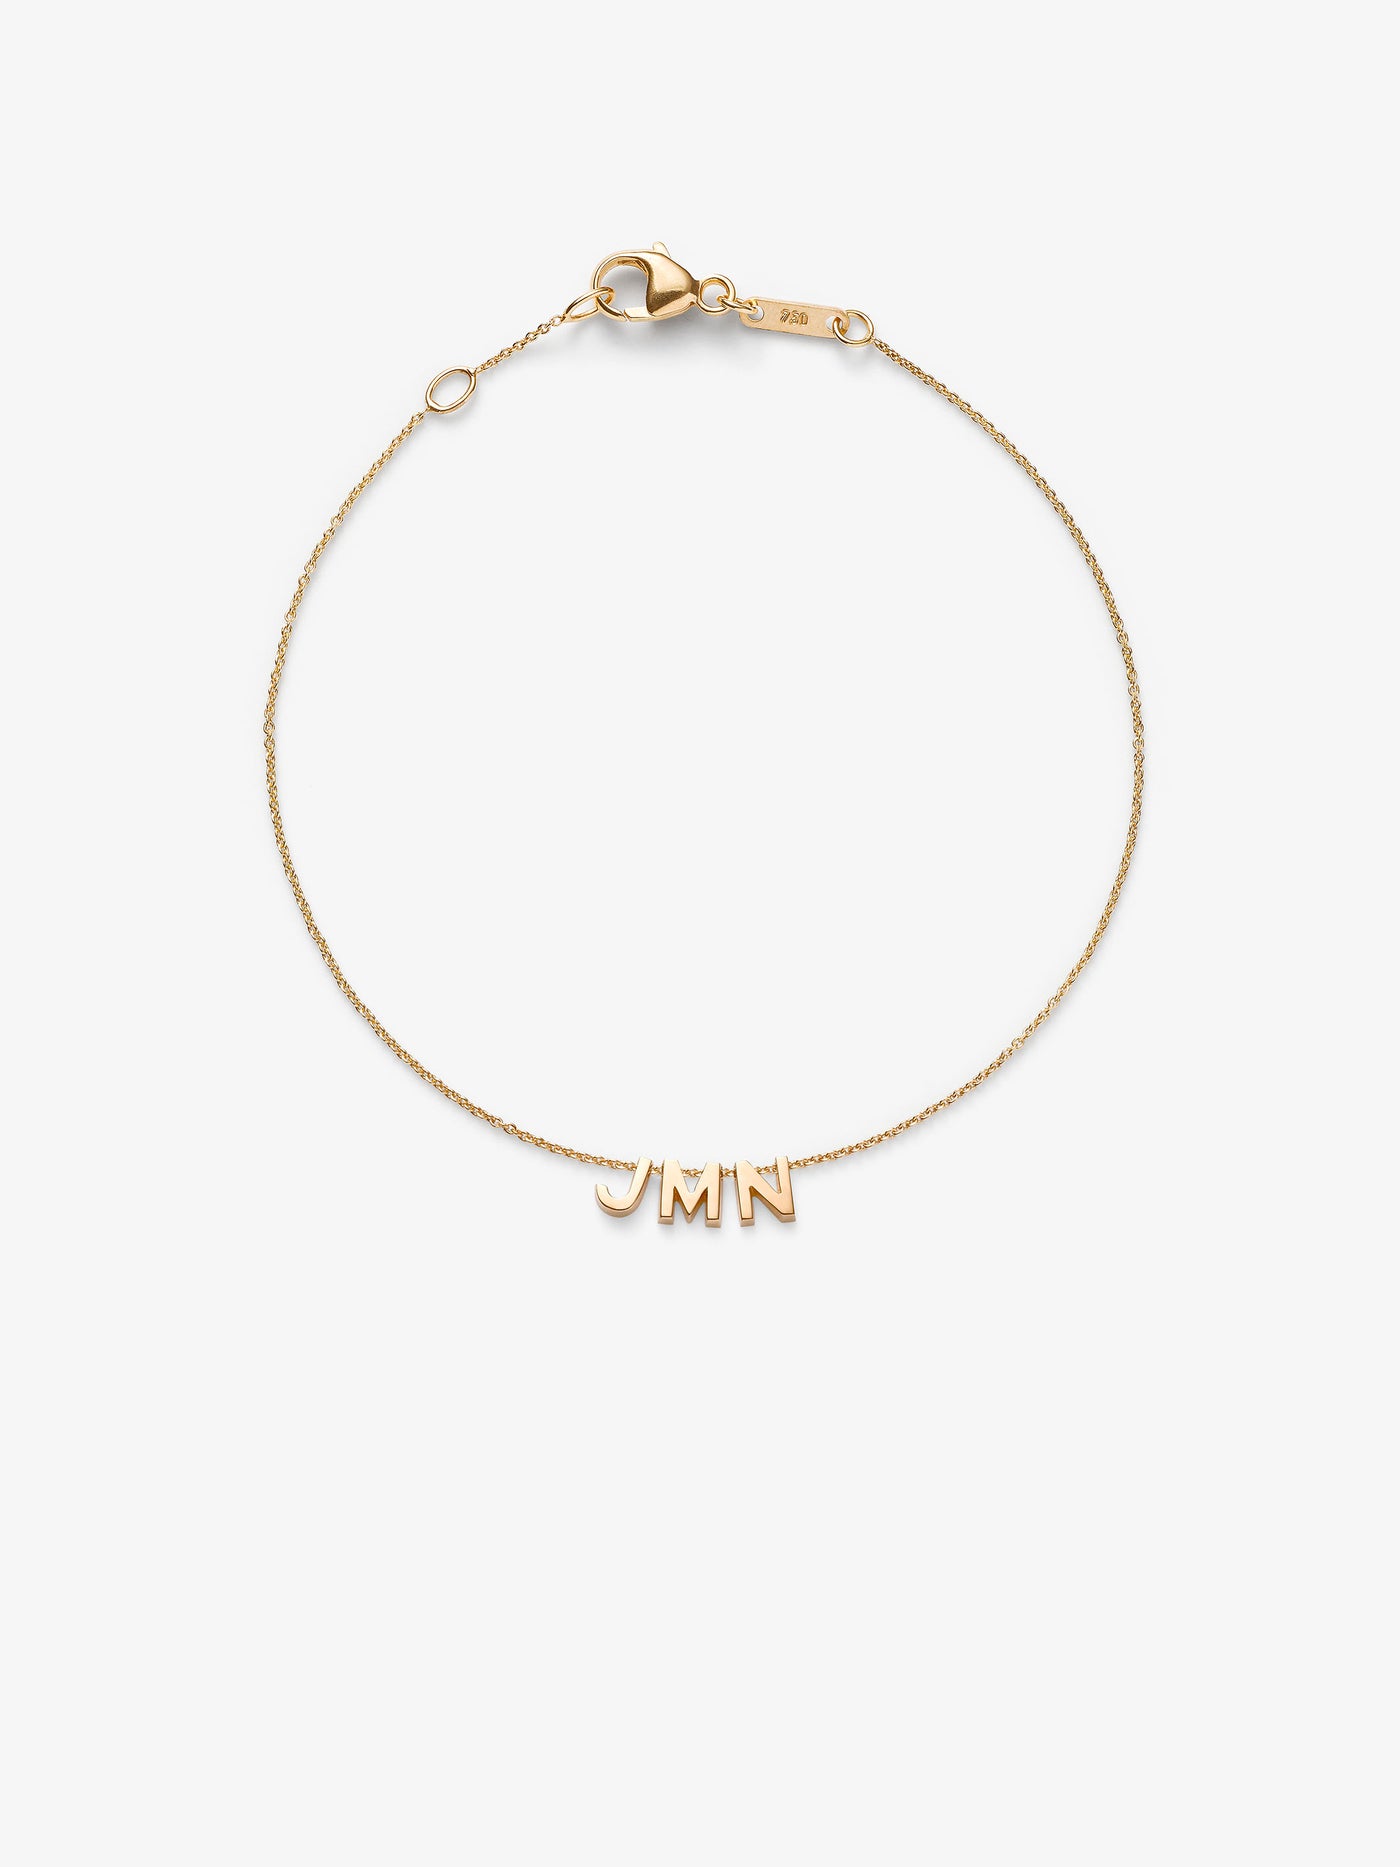 Love Letters Three Letters bracelet with adjustable chain in 18k solid gold.